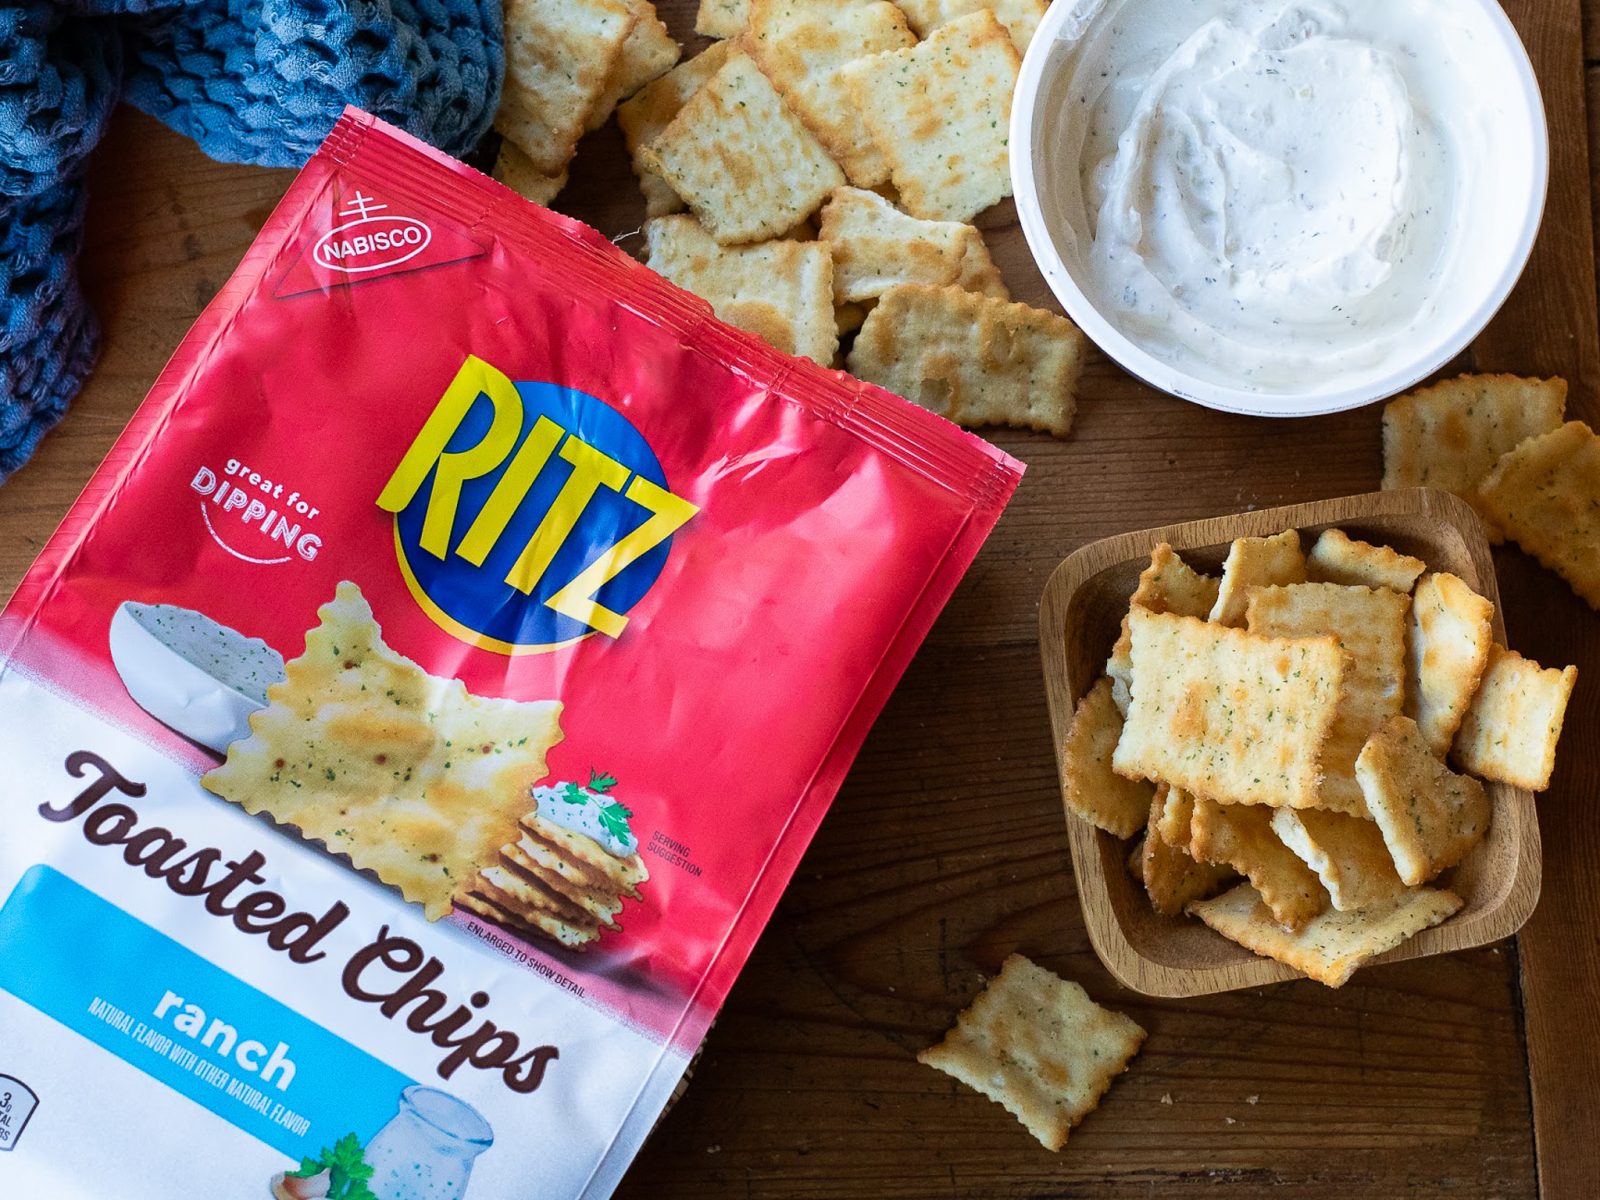 Family Size Bags Of Ritz Toasted Chips As Low As $1.99 At Kroger